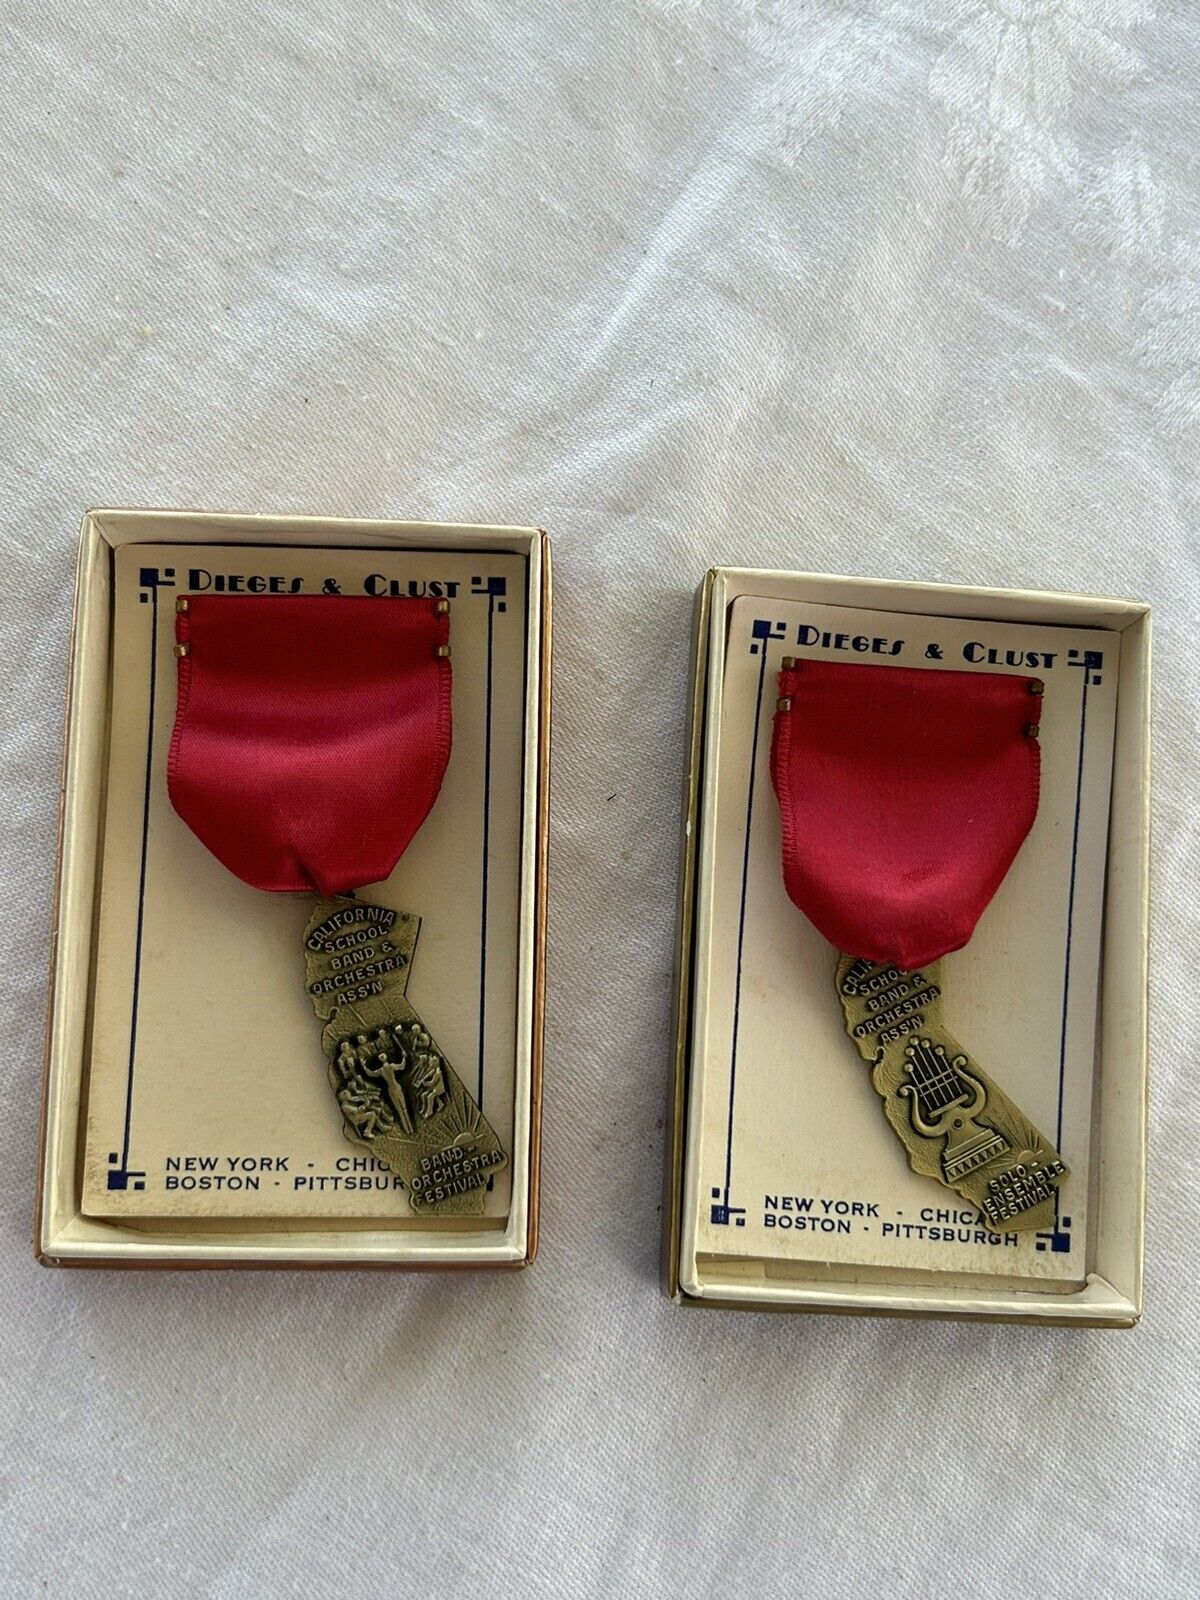 Lot of 2 VINTAGE DIEGES & CLUST CALIFORNIA SCHOOL MUSIC/BAND MEDALS Original Box